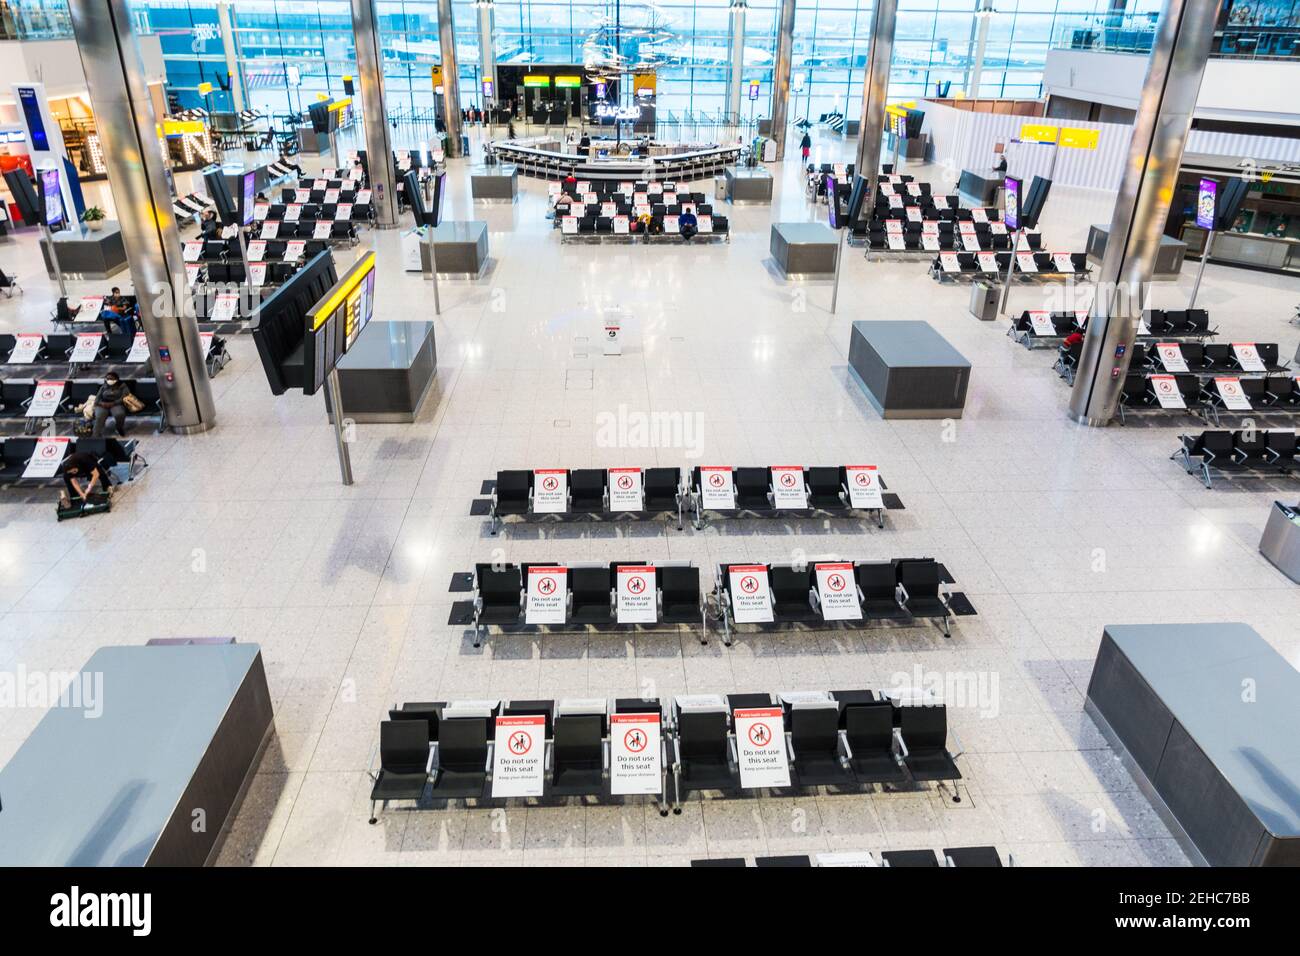 Pandemic air travel social distancing at London Heathrow airport terminal building seating area with placards placed on alternate seats Stock Photo